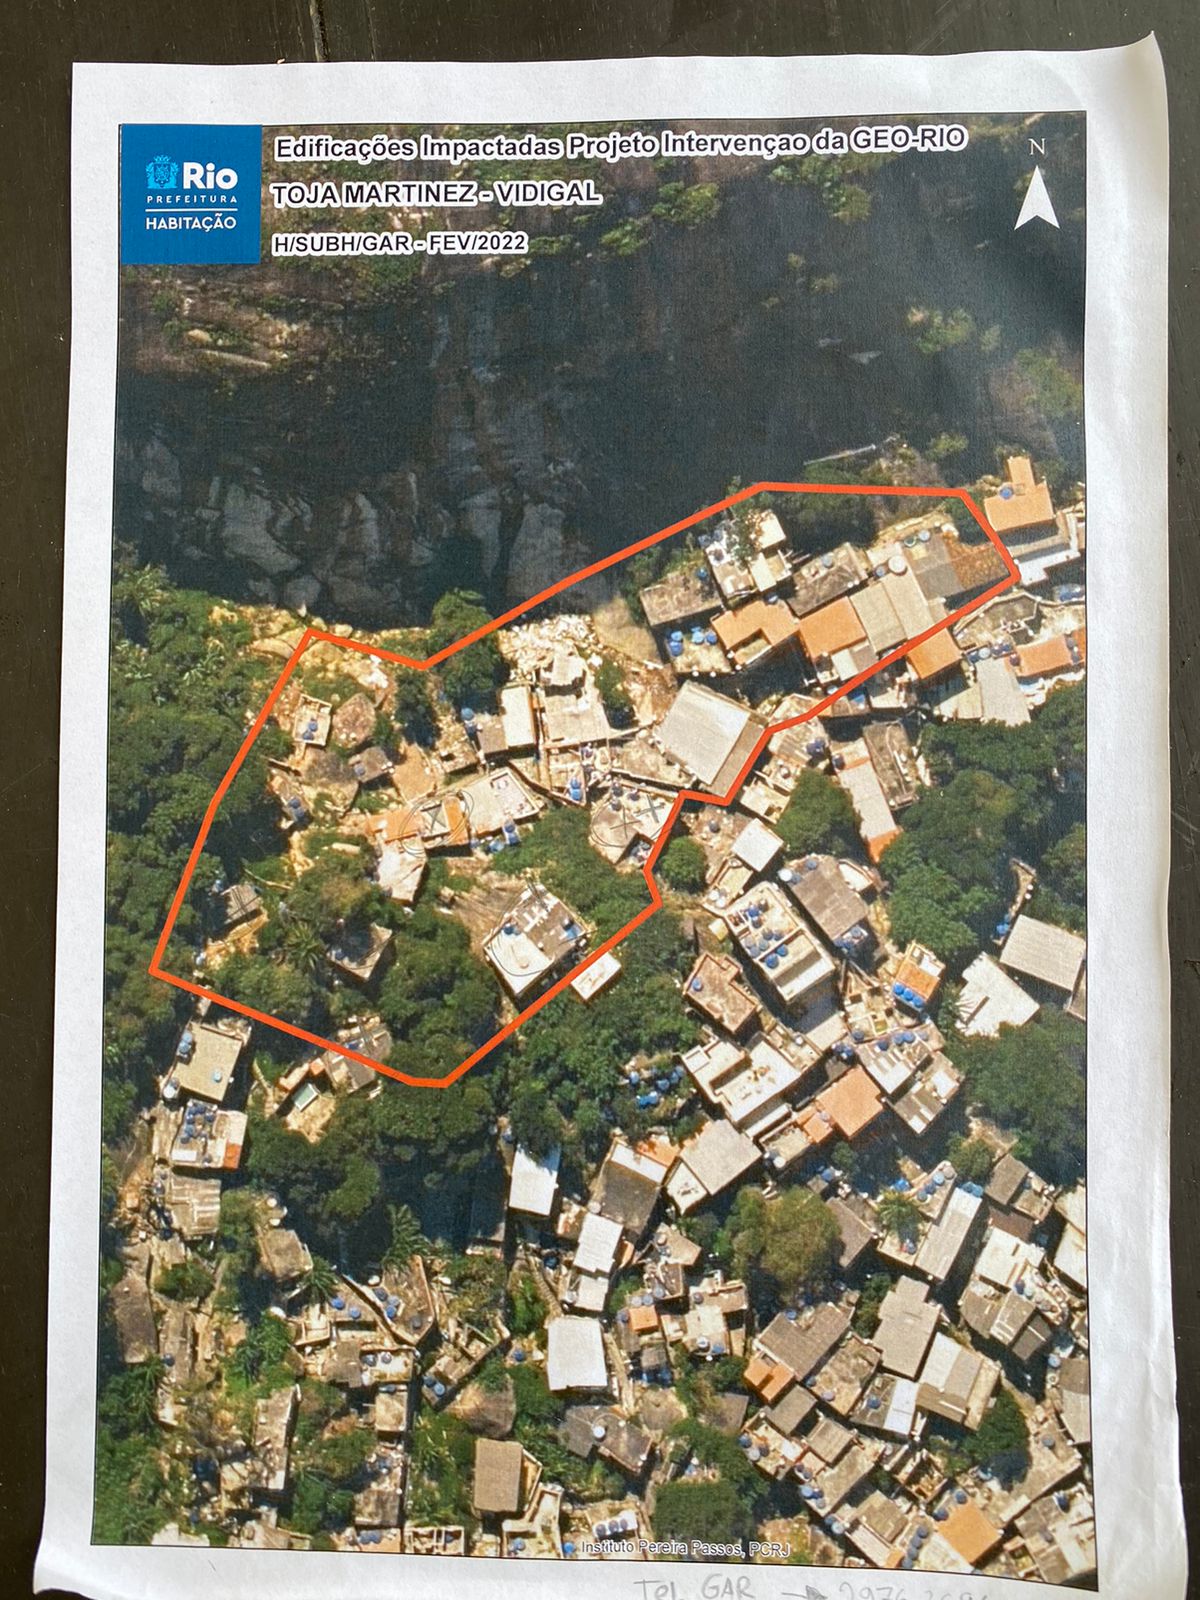 Current mapping of houses to be evicted in the Jaqueira area. Source: Geo-Rio